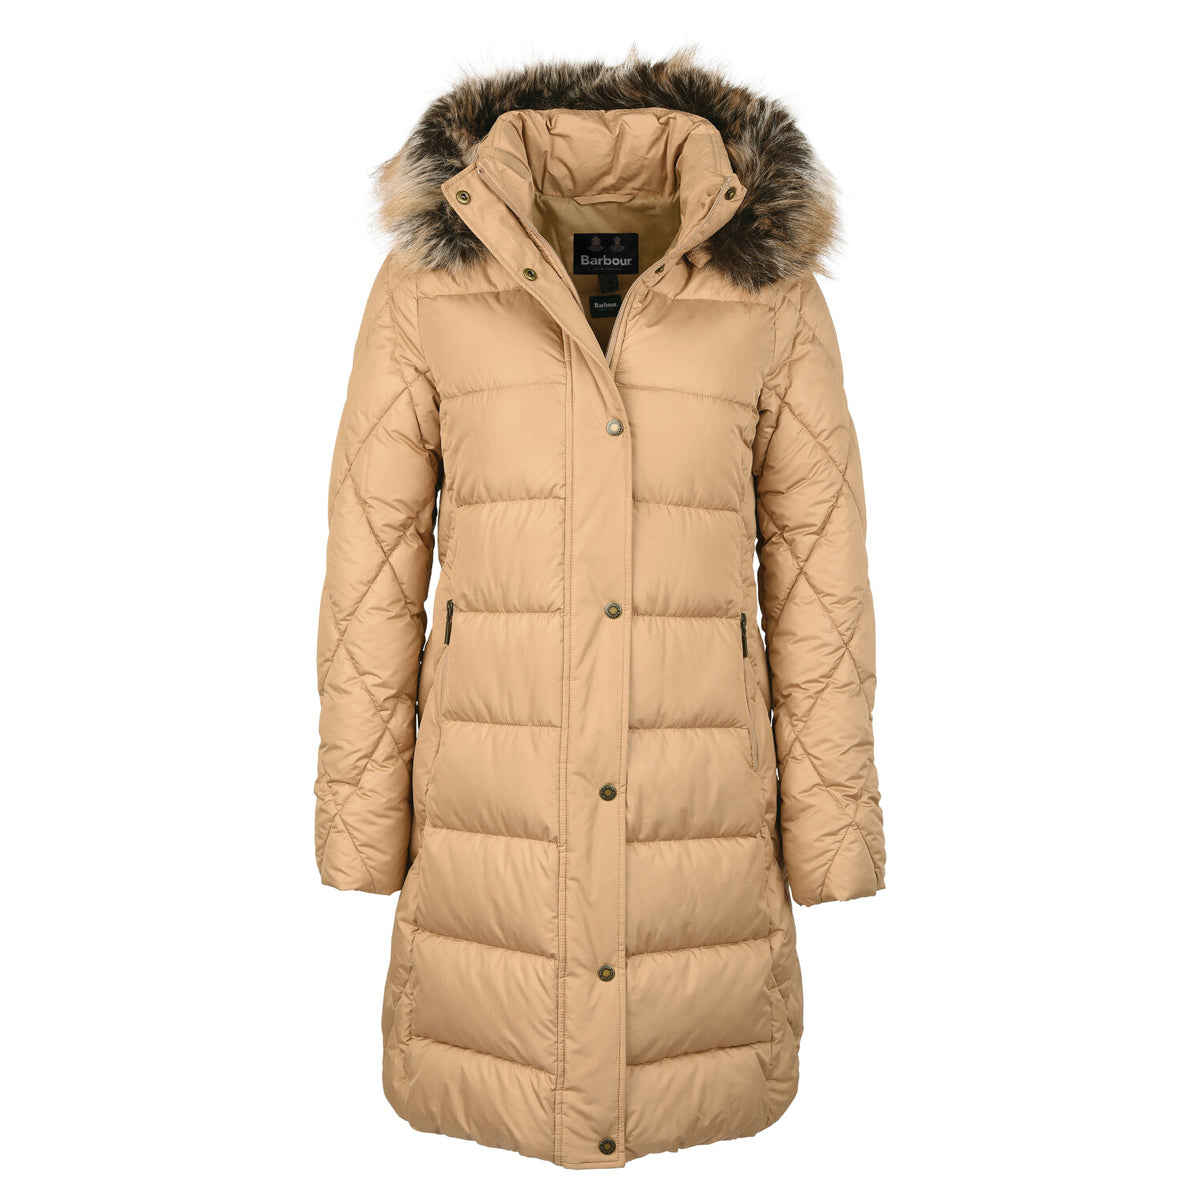 Barbour Daffodil Women's Quilted Jacket | Hessian